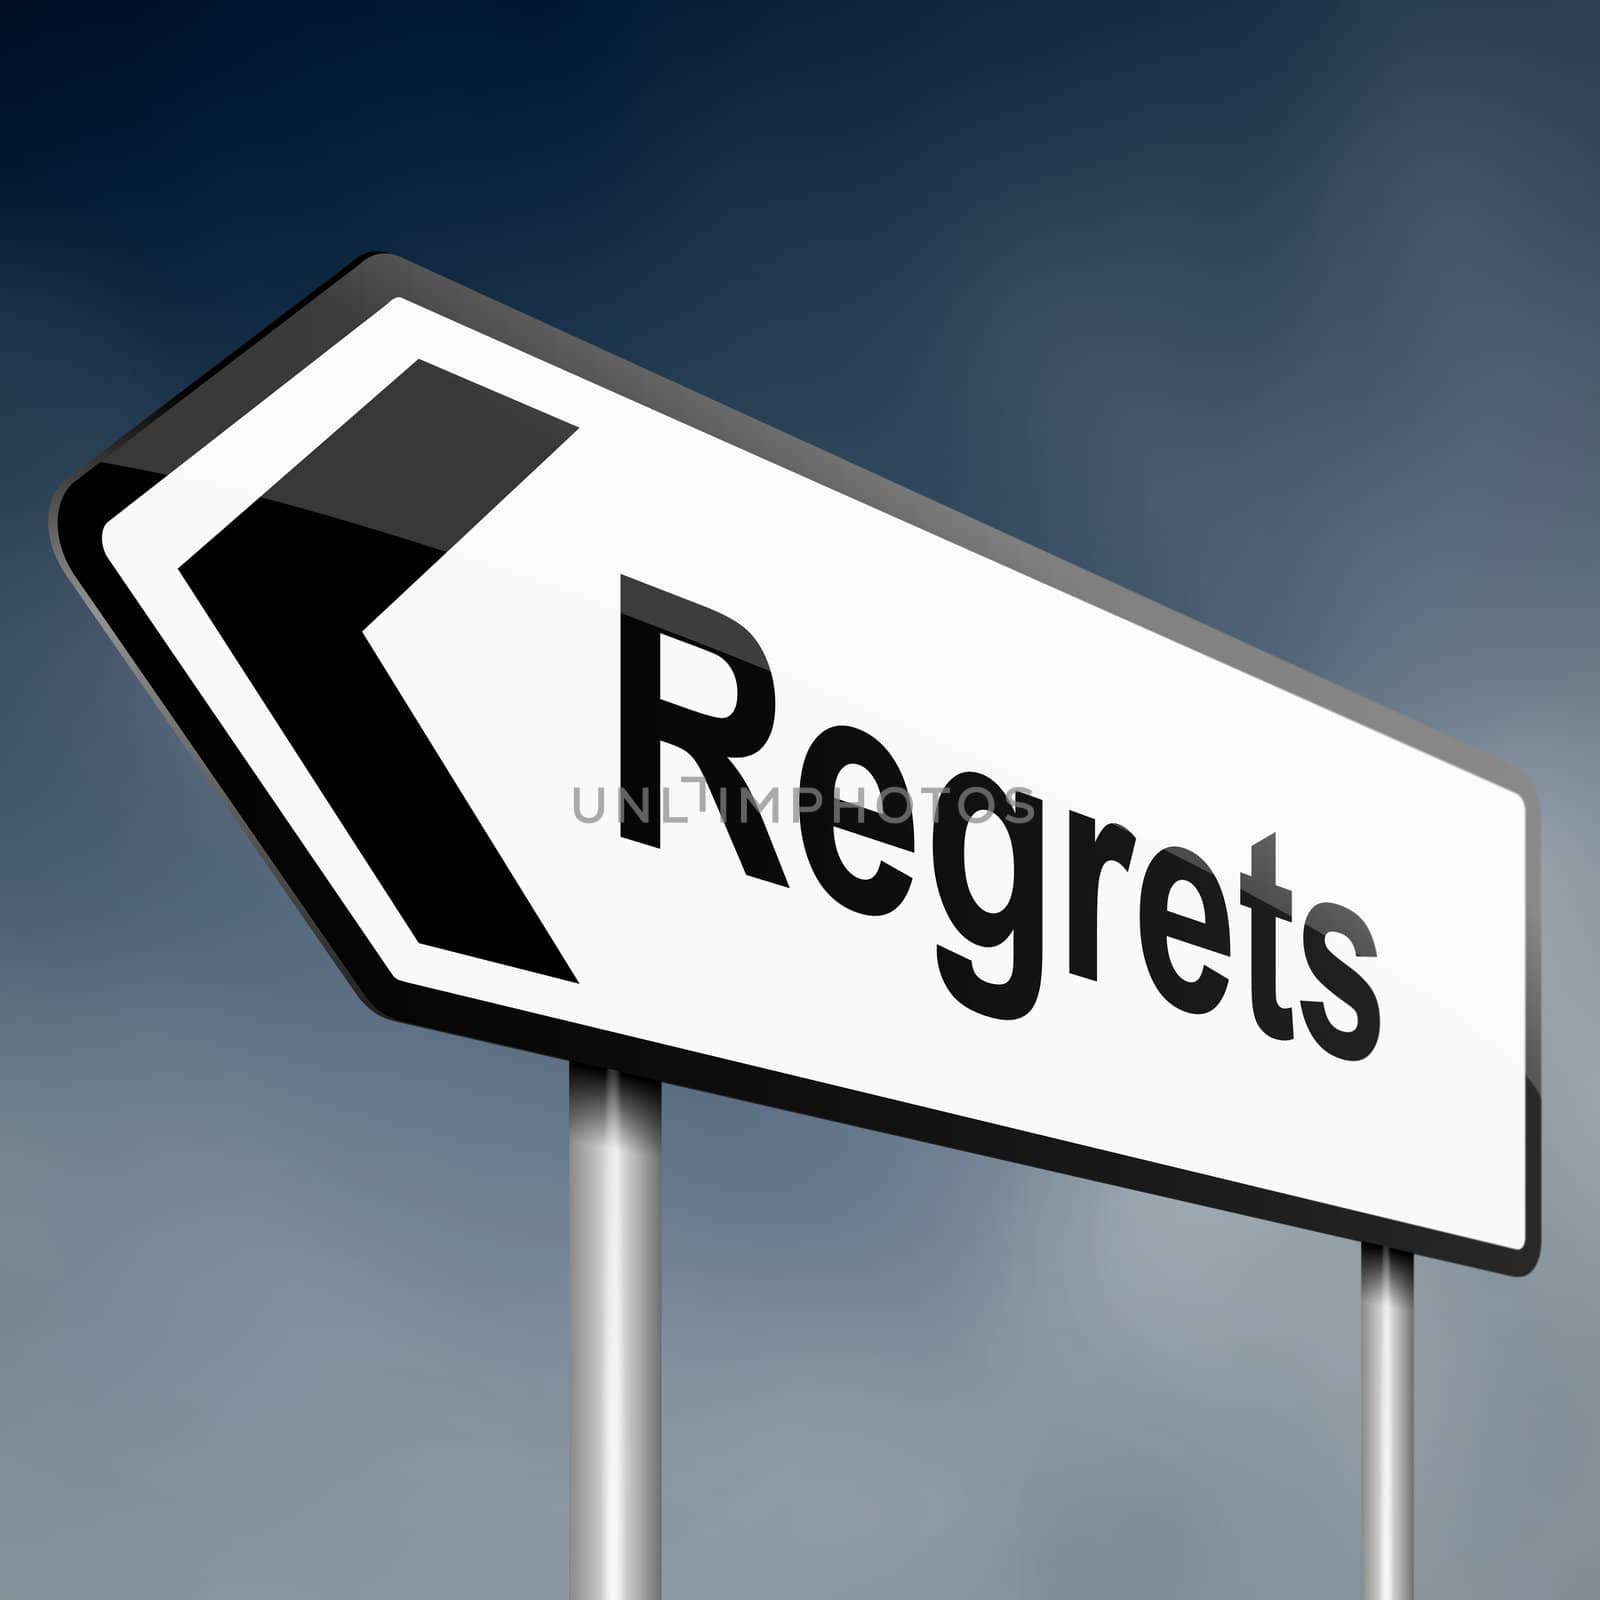 illustration depicting a sign post with directional arrow containing a regrets concept. Blurred background.